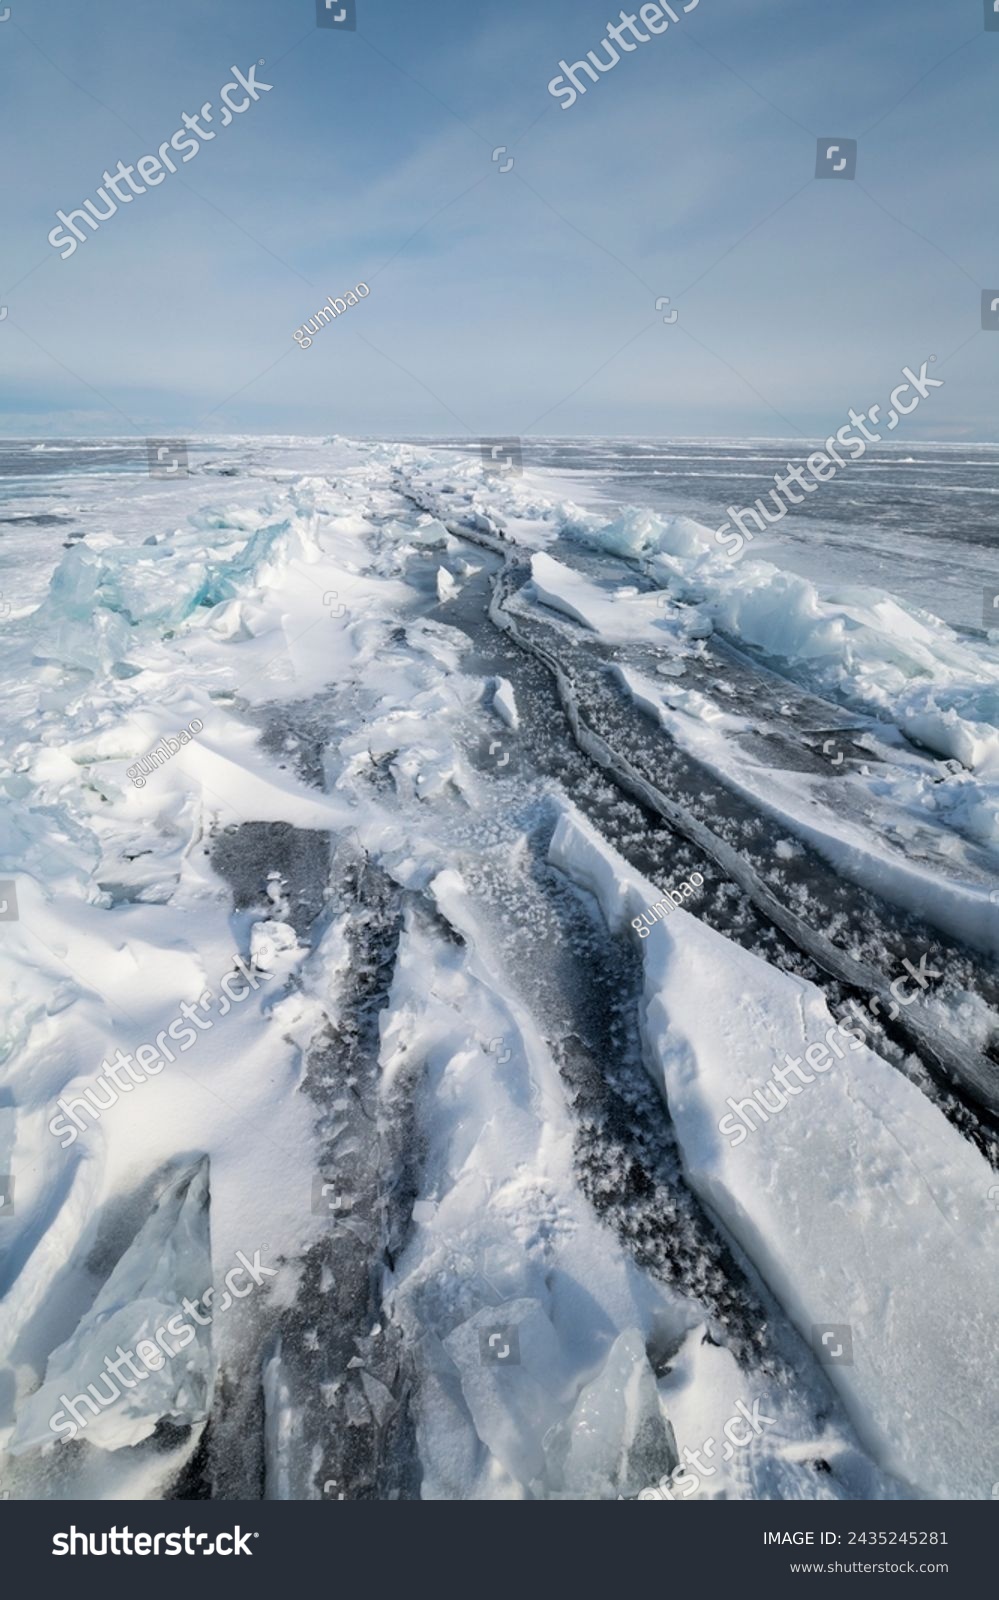 Ice of lake Baikal in winter, the deepest and largest freshwater lake by volume in the world, located in southern Siberia, Russia #2435245281